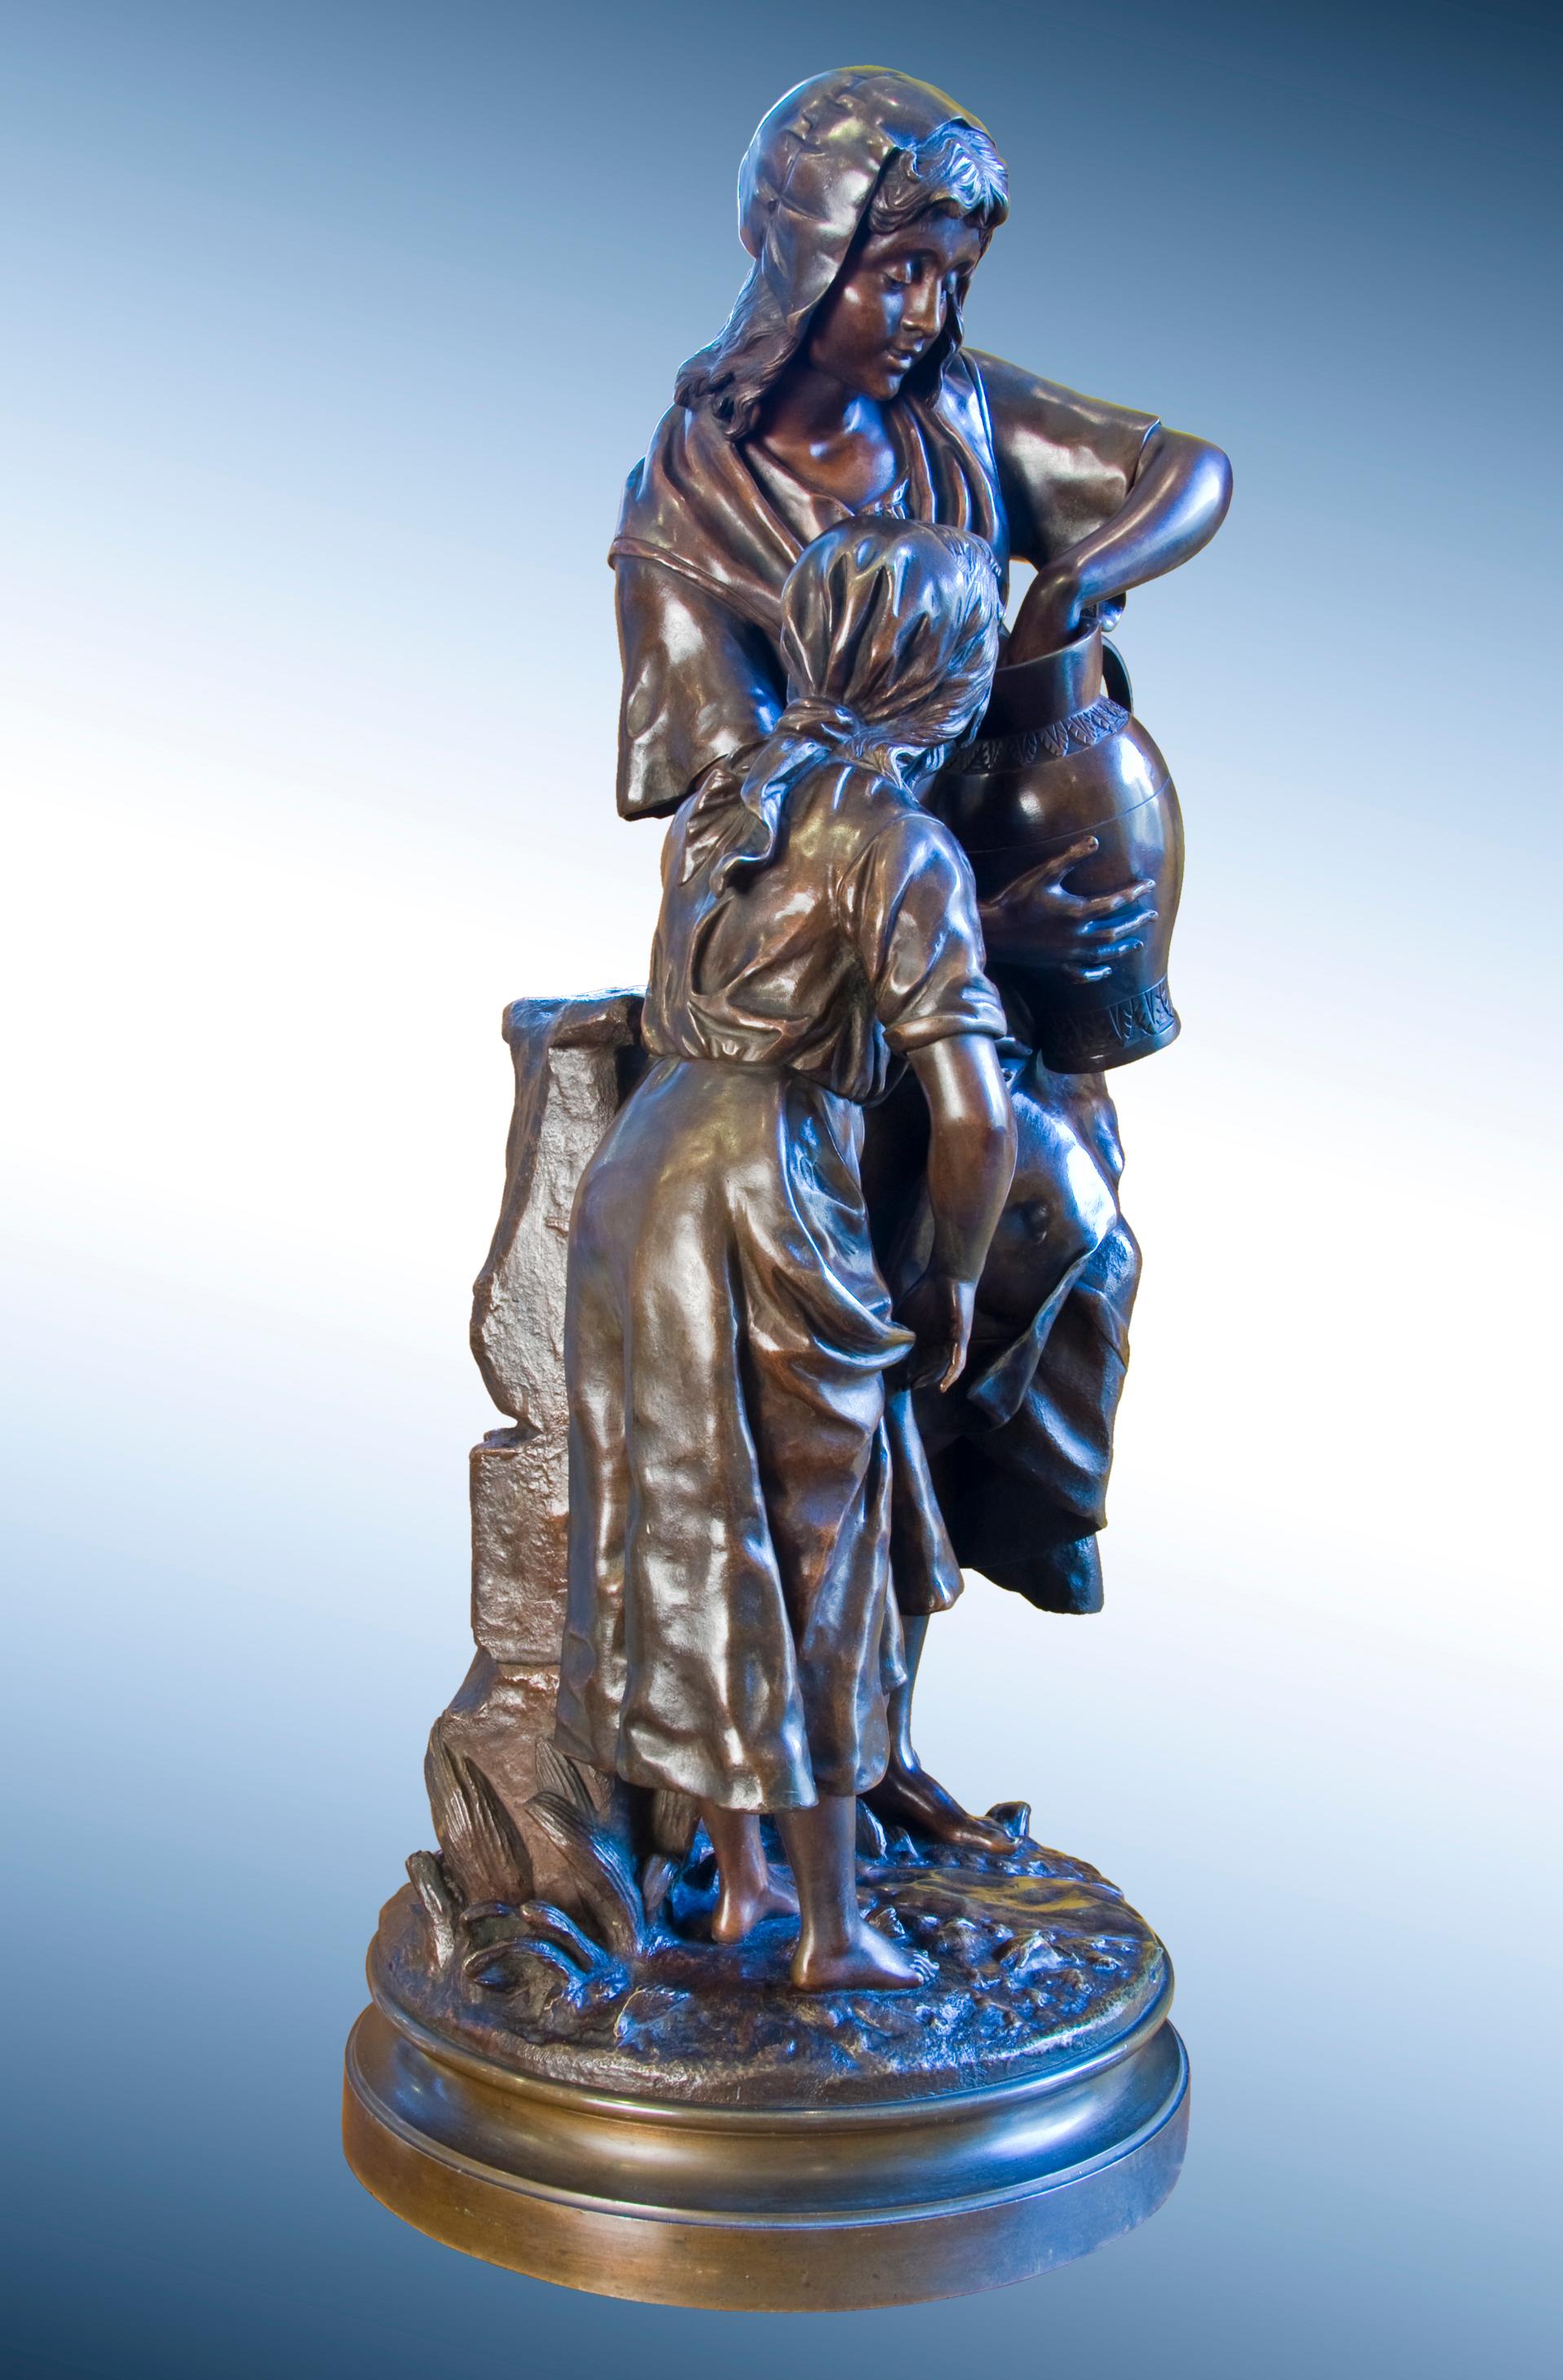 Nice 19th-century cast with rich, brown patina by French sculptor Emile-Joseph-Nestor Carlier. Carlier frequently created large, multi-figural group sculptures. These are dramatic and A LOT OF sculpture.  